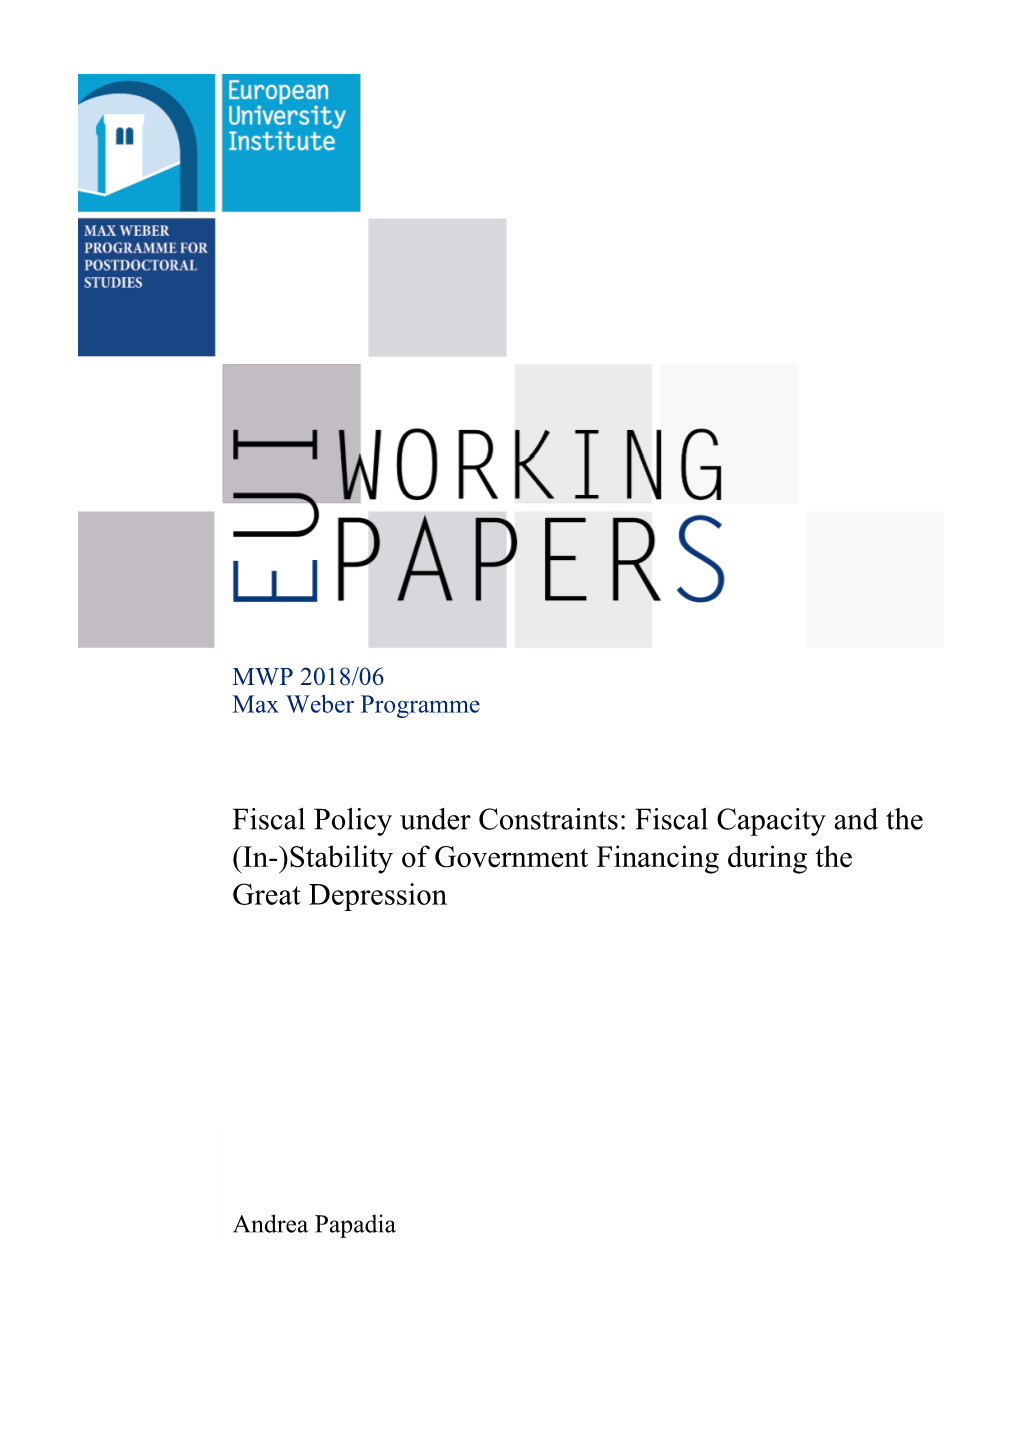 Fiscal Capacity and the (In-)Stability of Government Financing During The